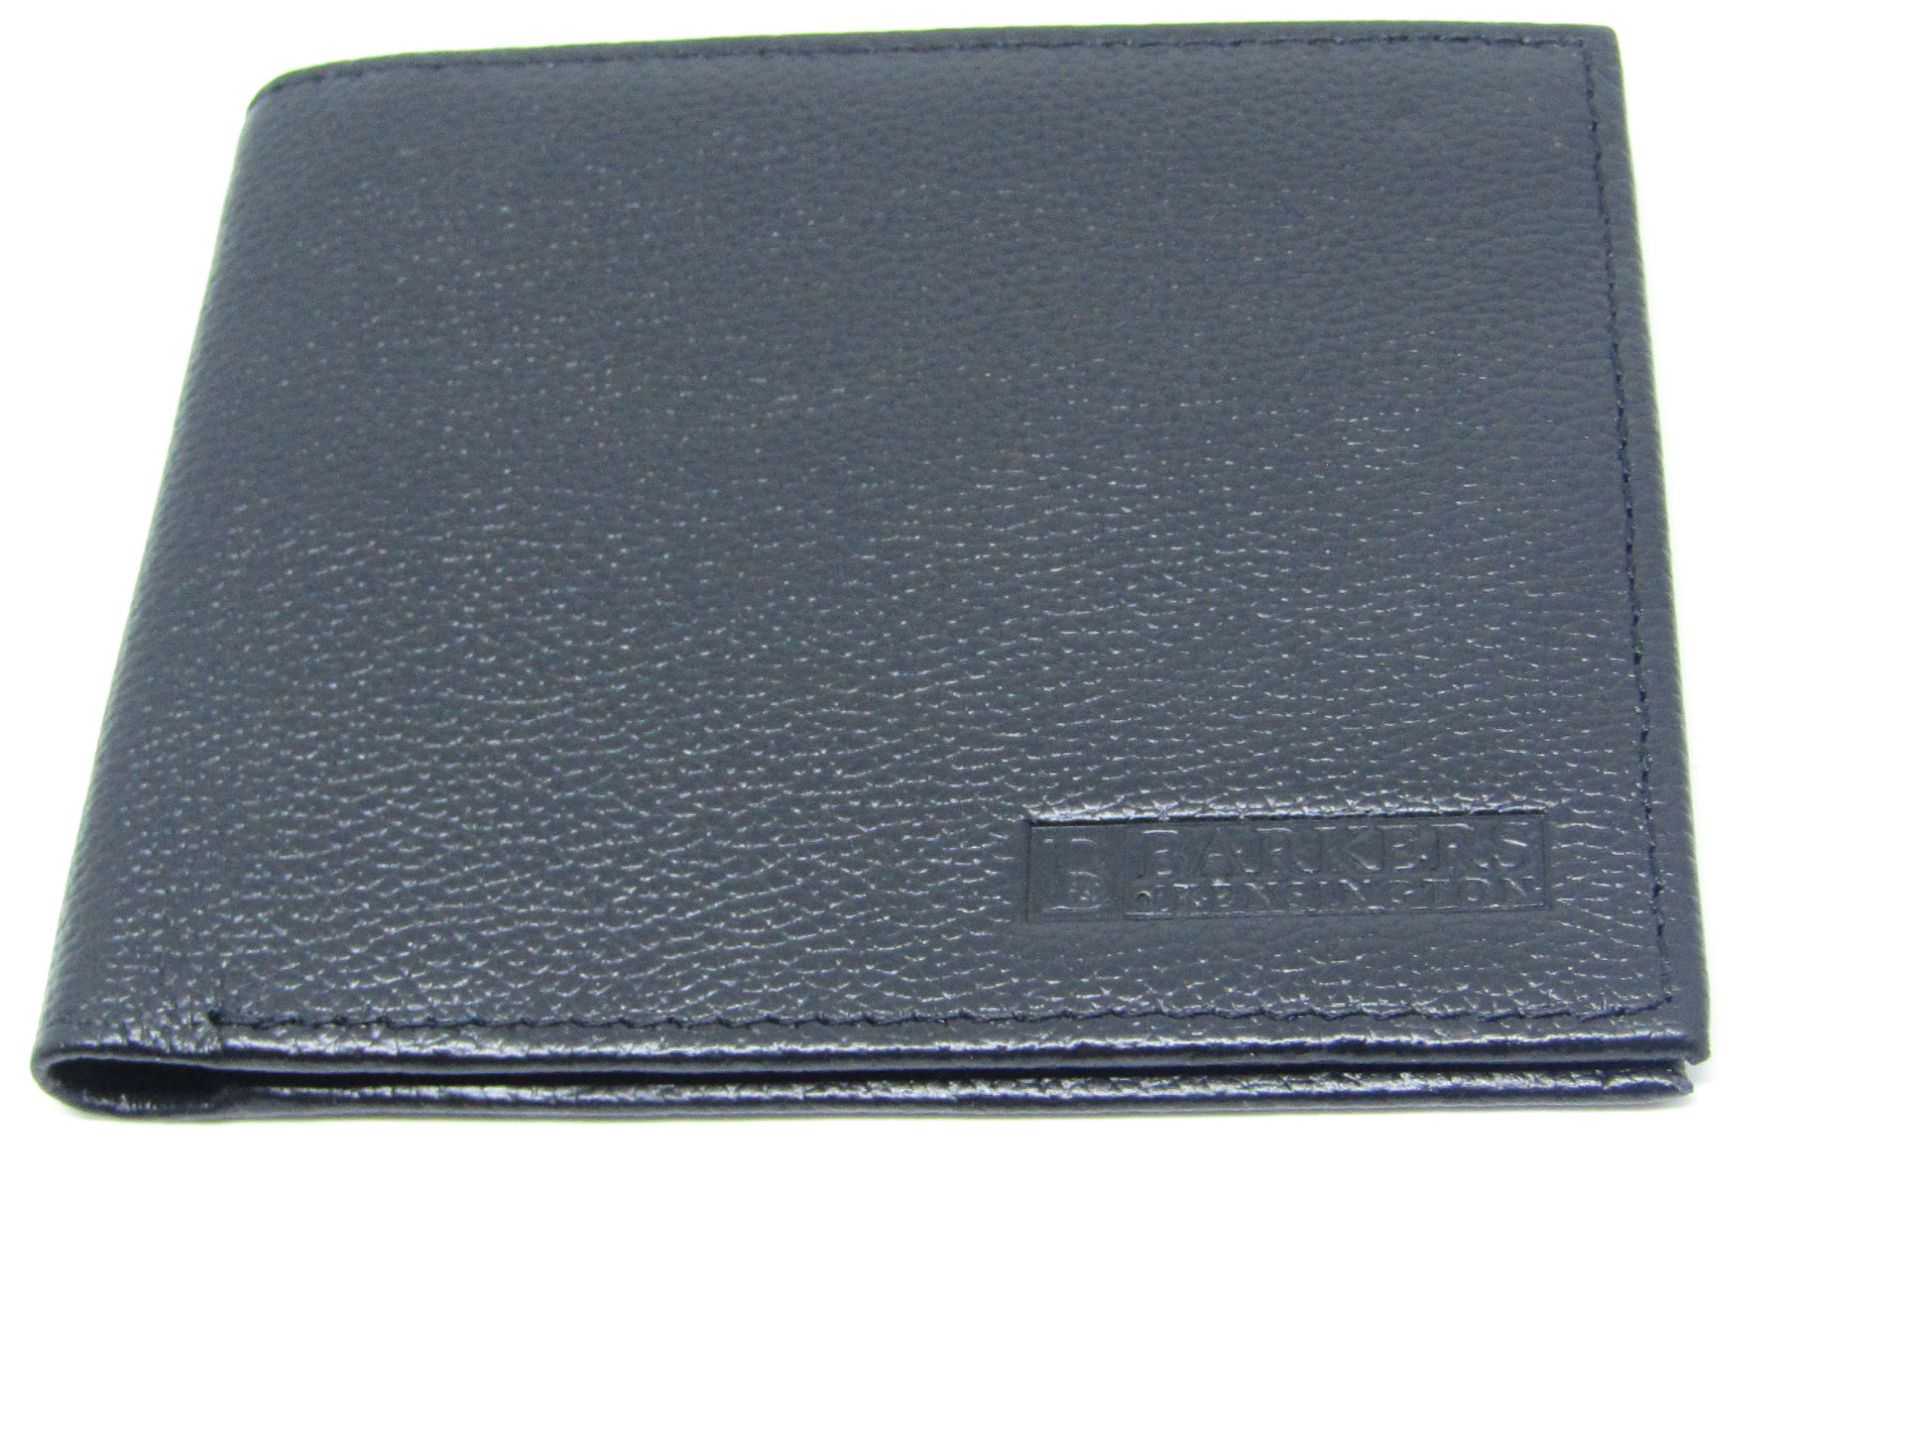 Barkers of Kensington Black Leather wallet new & packaged